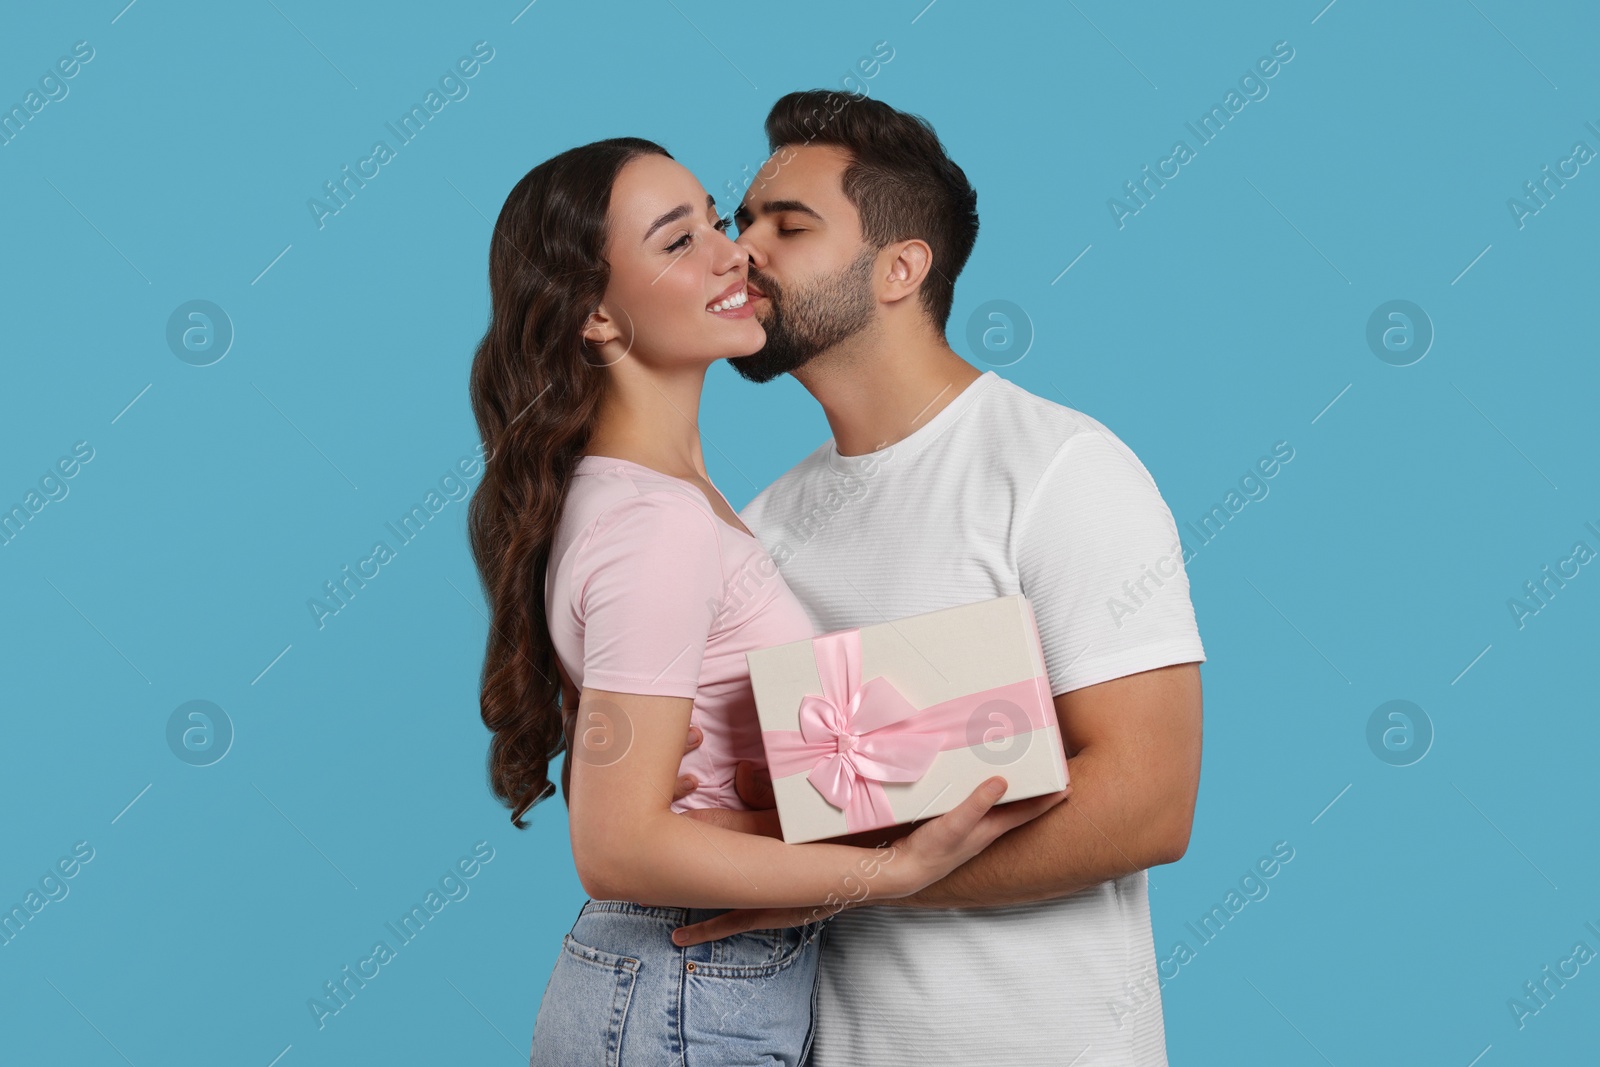 Photo of Man kissing his smiling girlfriend on light blue background. Celebrating holiday